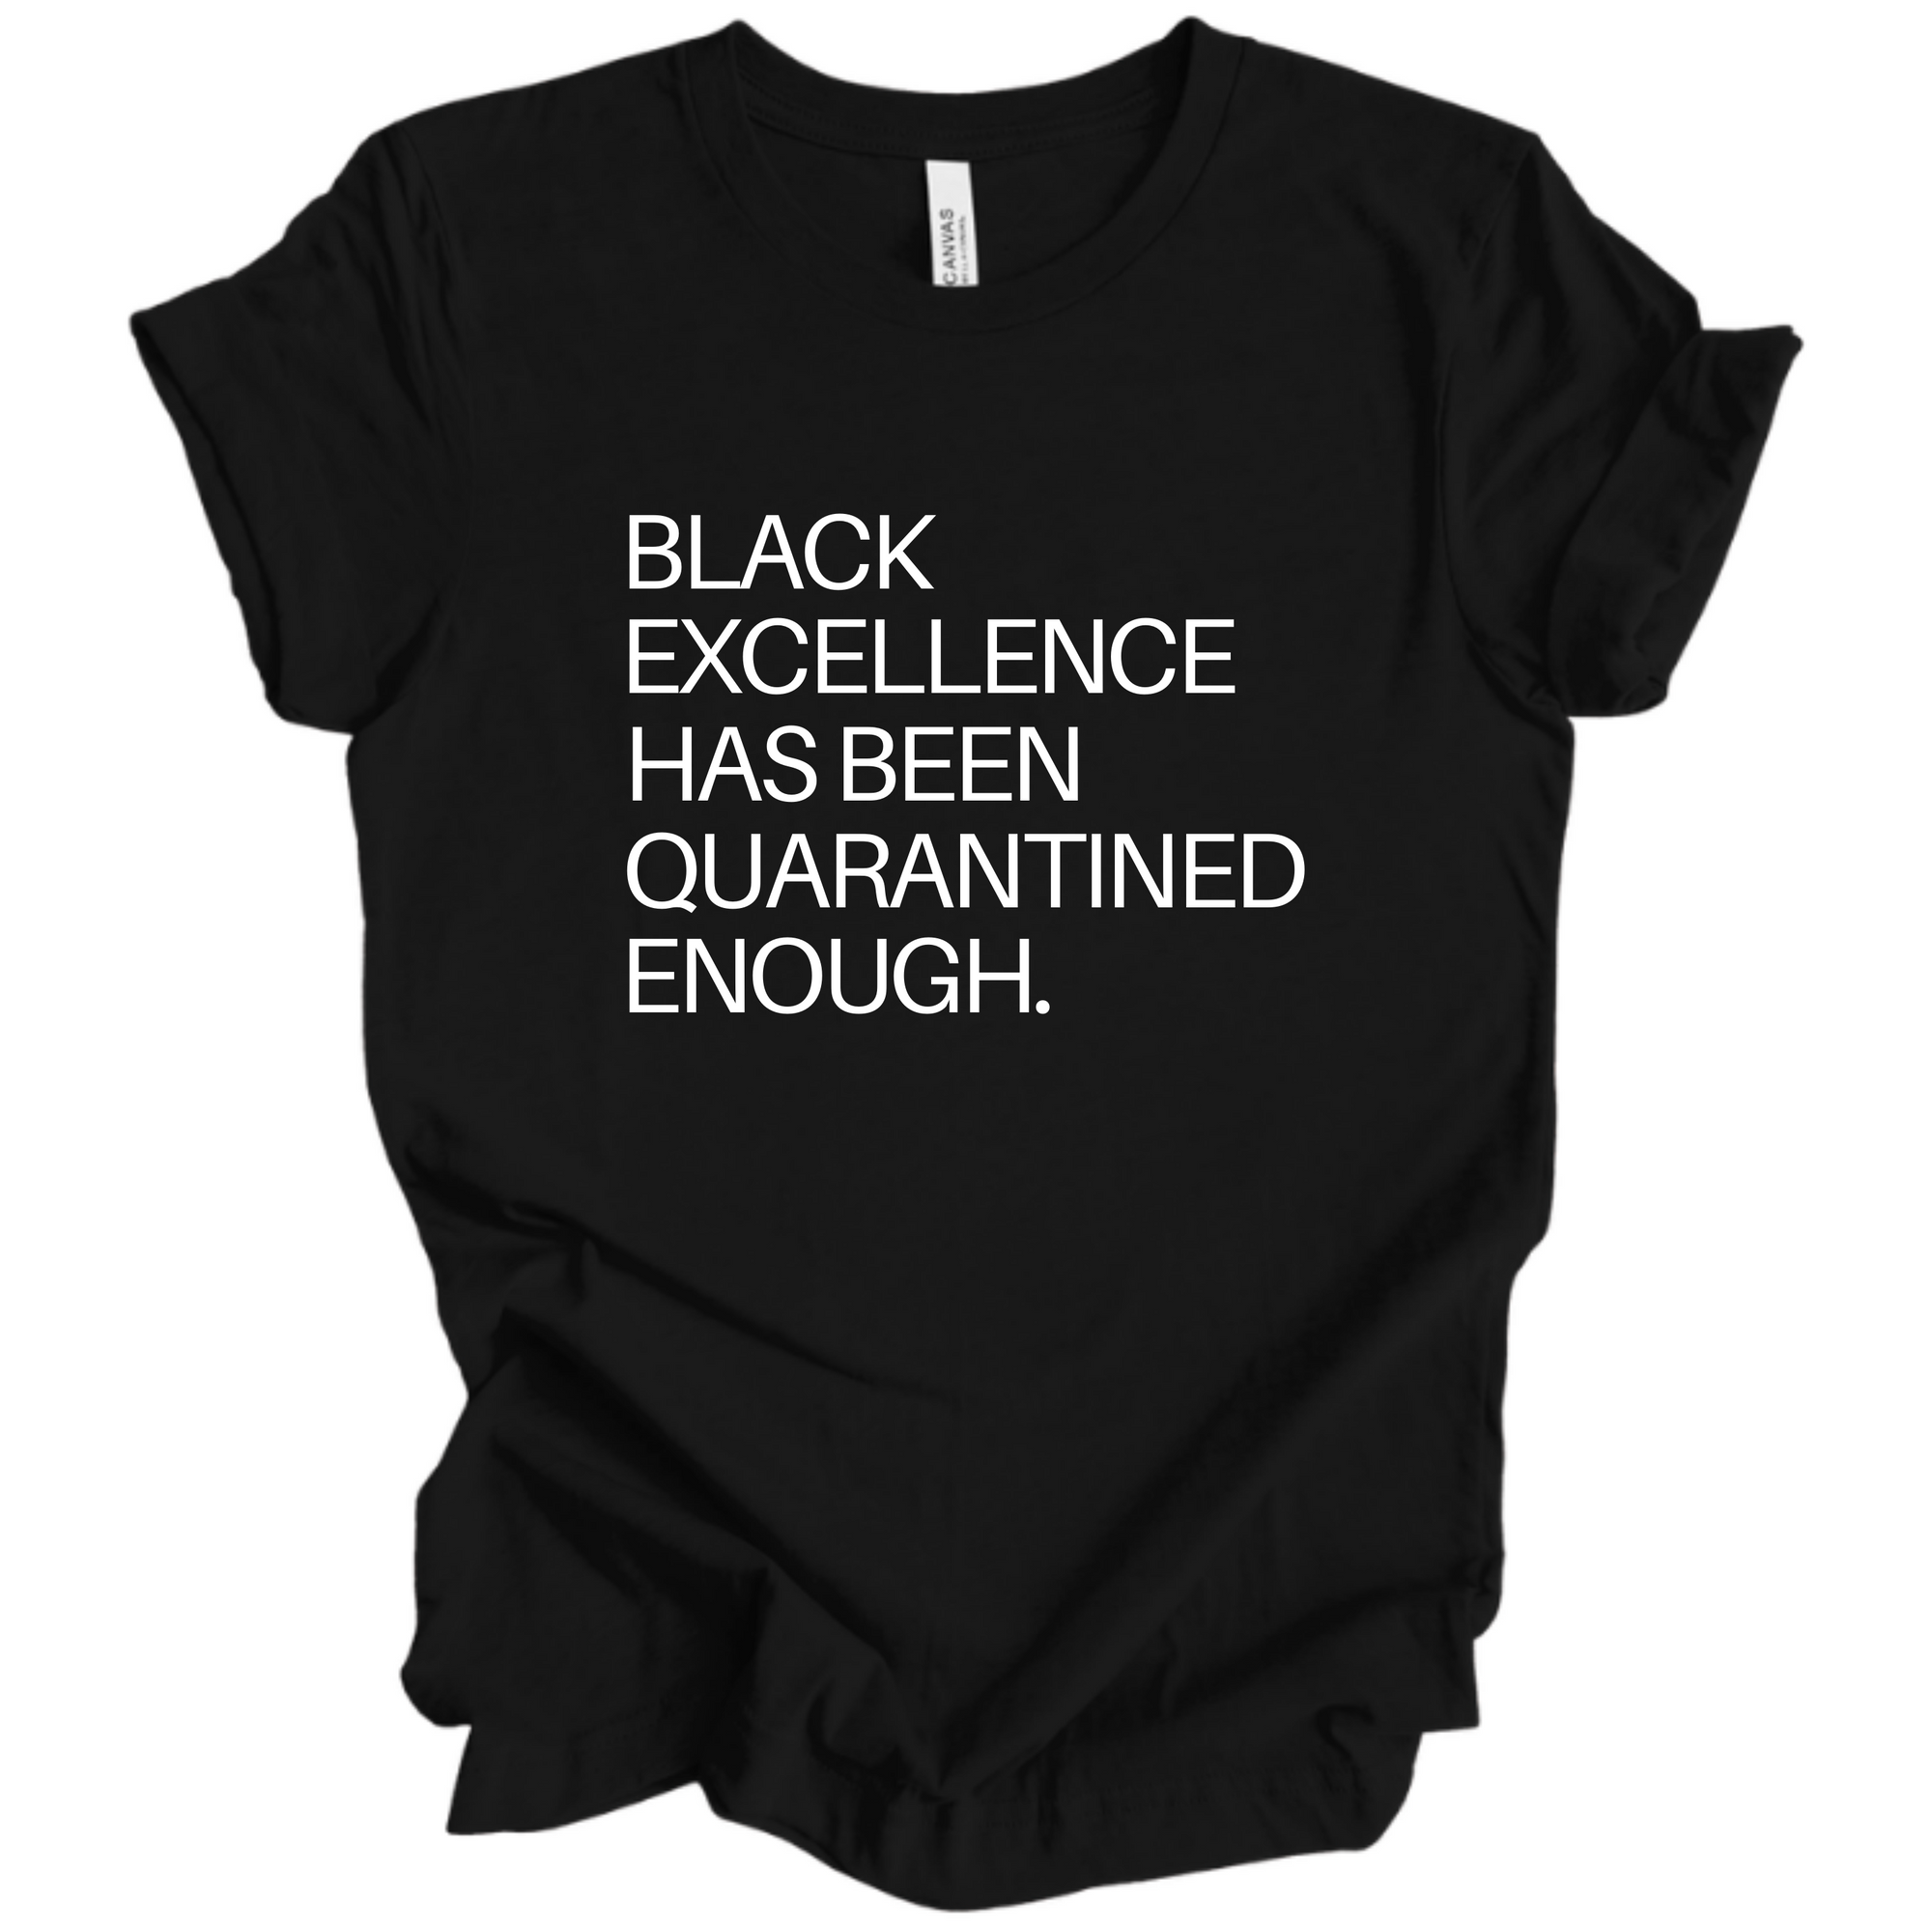 Black Excellence Has Been Quarantined Enough - Tee